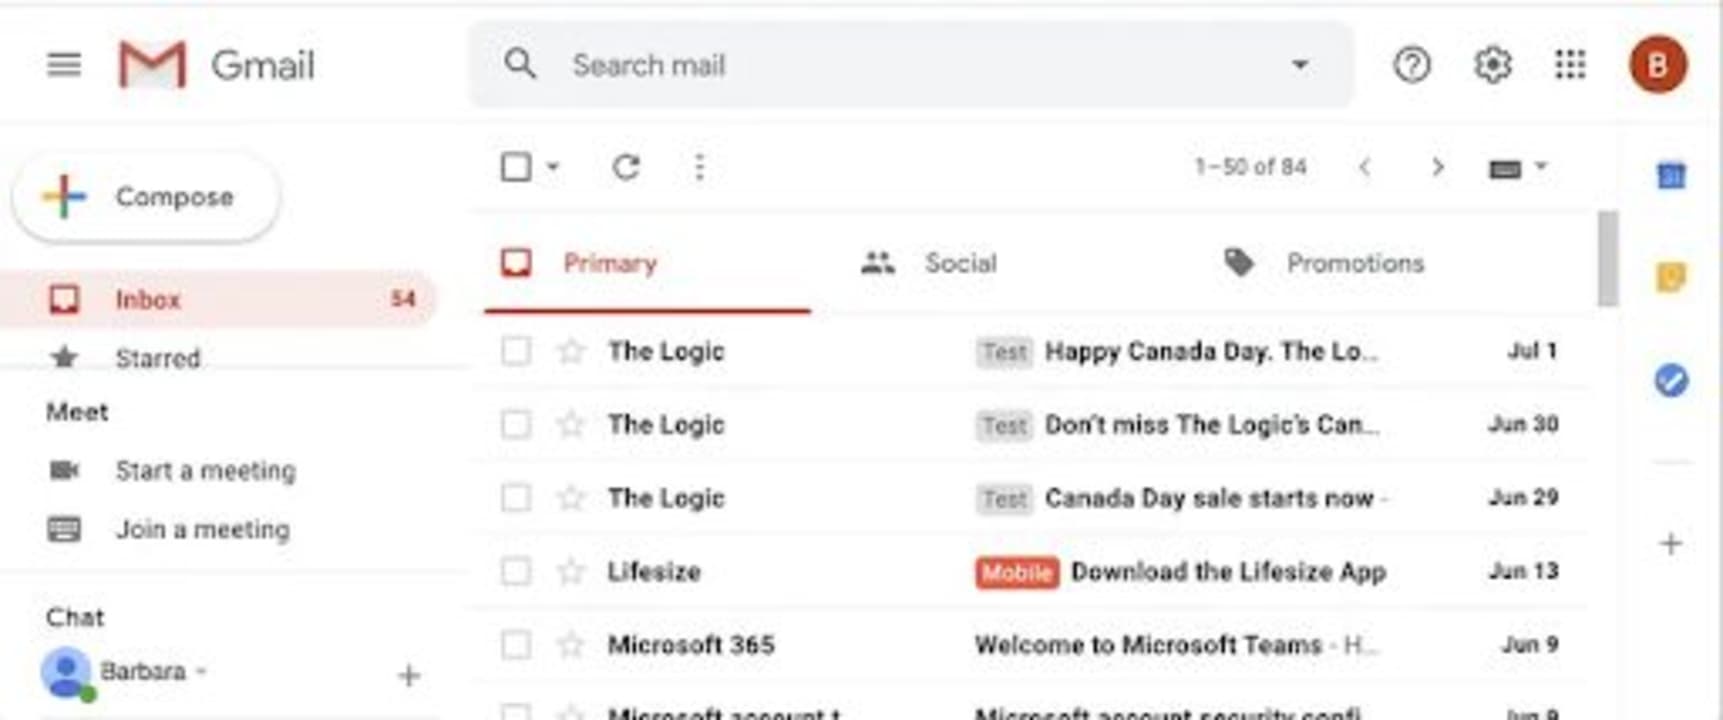 Organize your inbox with Gmail color-coded labels